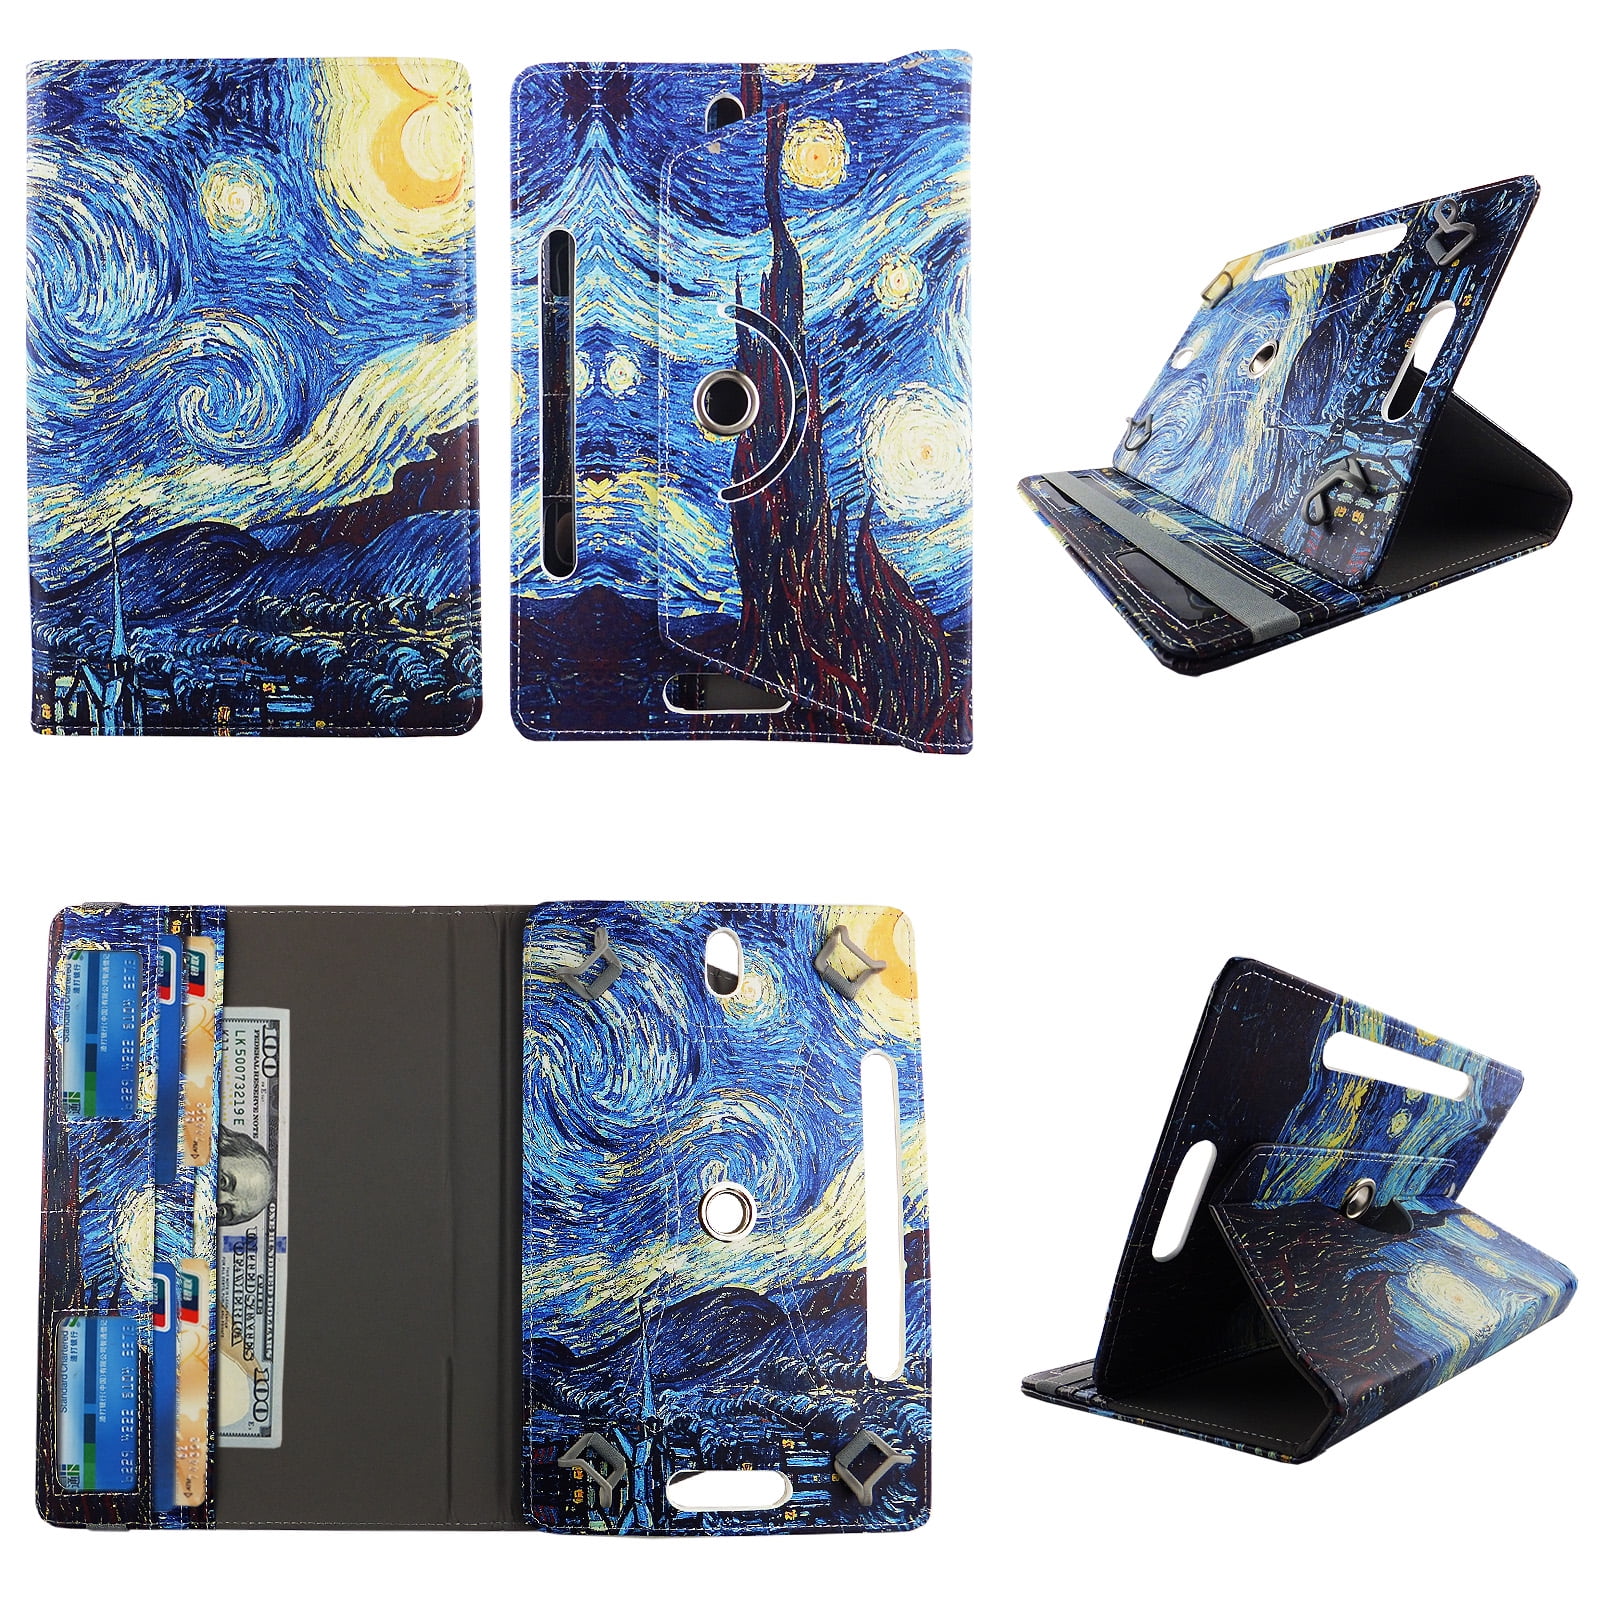 Starry Night tablet case 8 inch for Samsung Galaxy Tab 3 8 